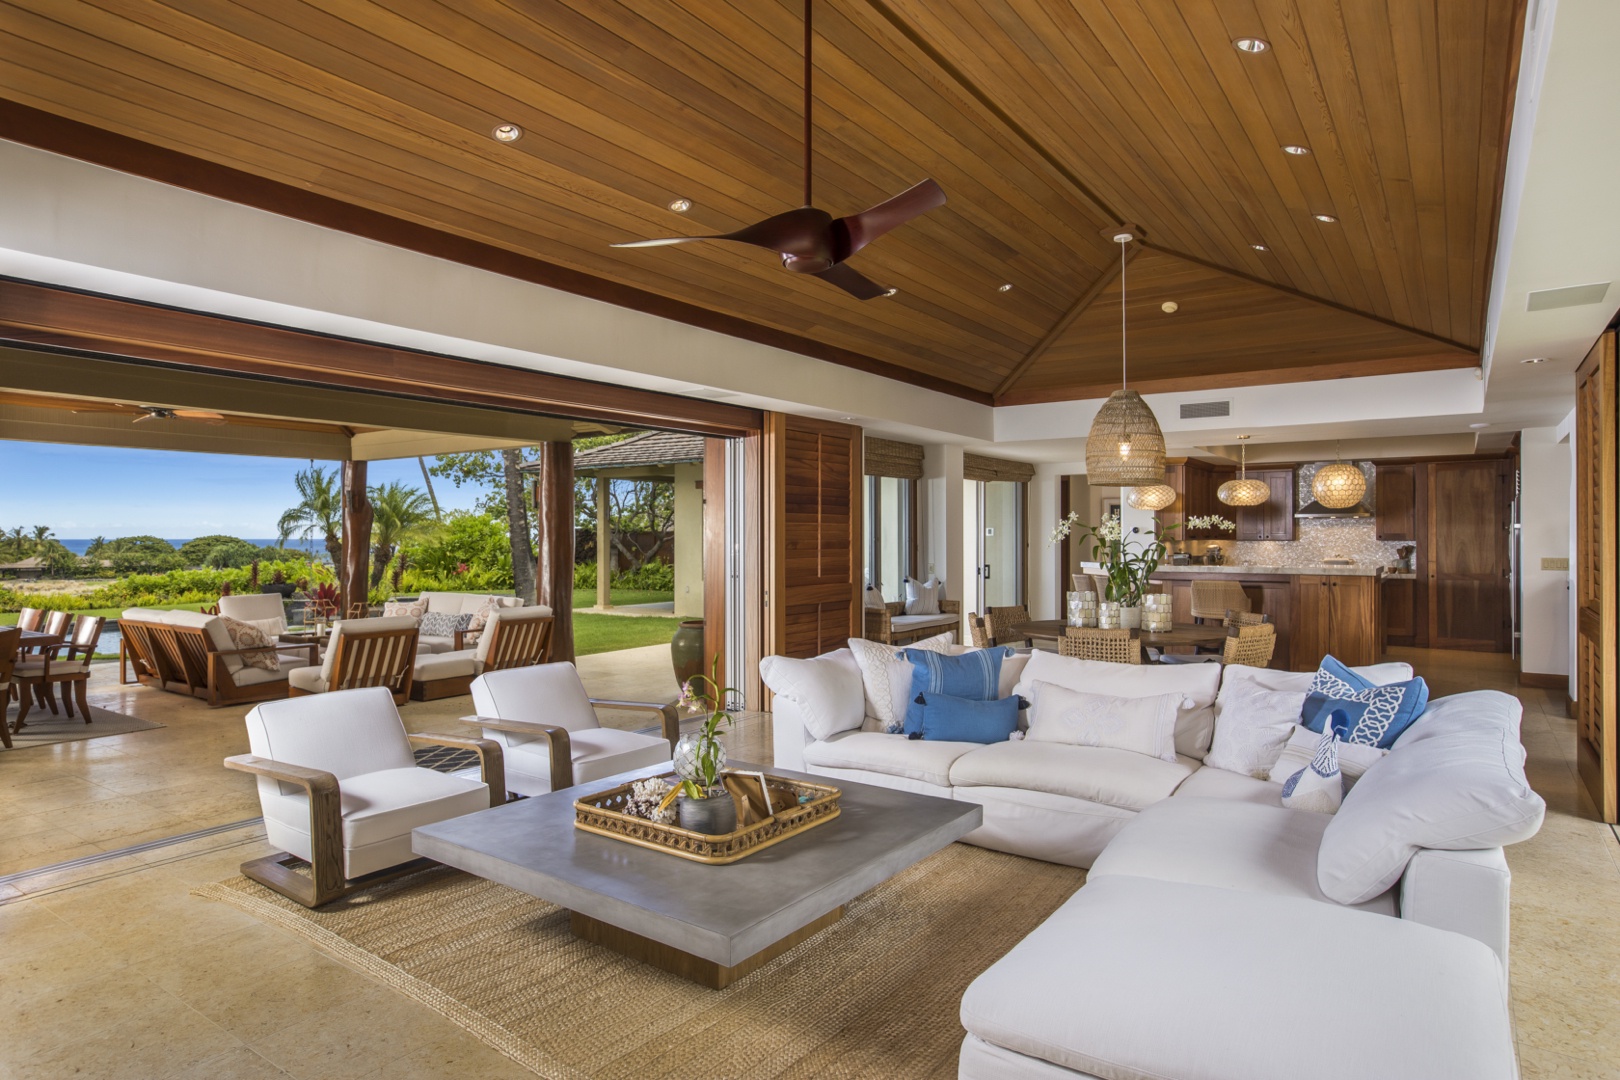 Kailua Kona Vacation Rentals, 4BD Kahikole Street (218) Estate Home at Four Seasons Resort at Hualalai - The elegant great room opens to the lanai, offering expansive views & an indoor/outdoor living experience